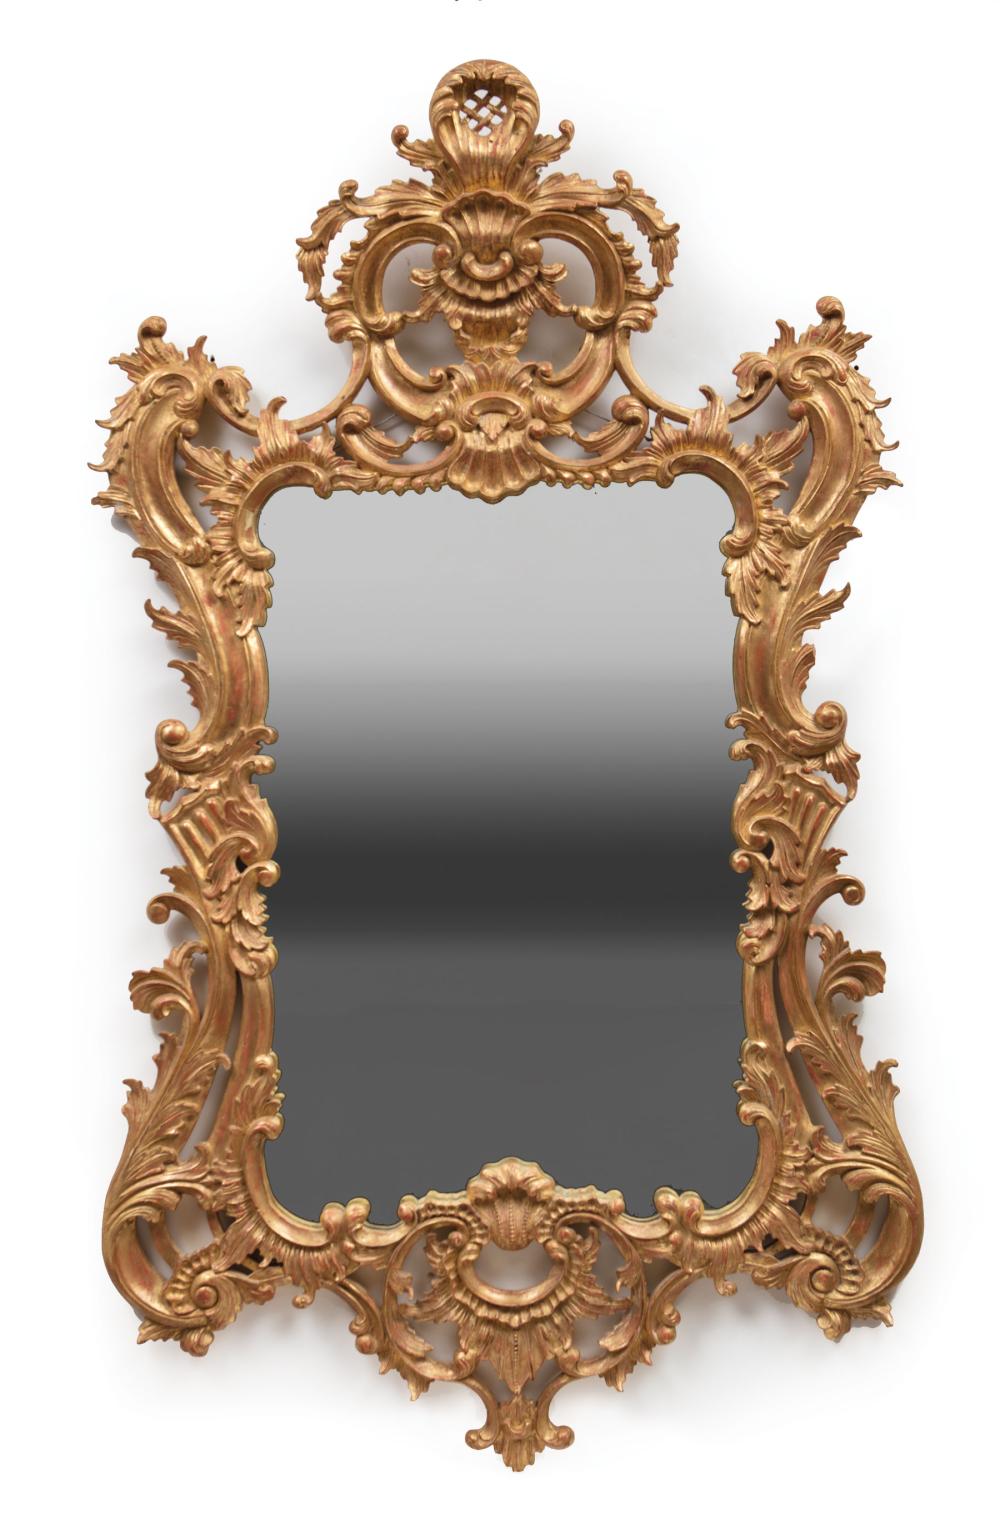 CONTINENTAL ROCOCO-STYLE GILTWOOD